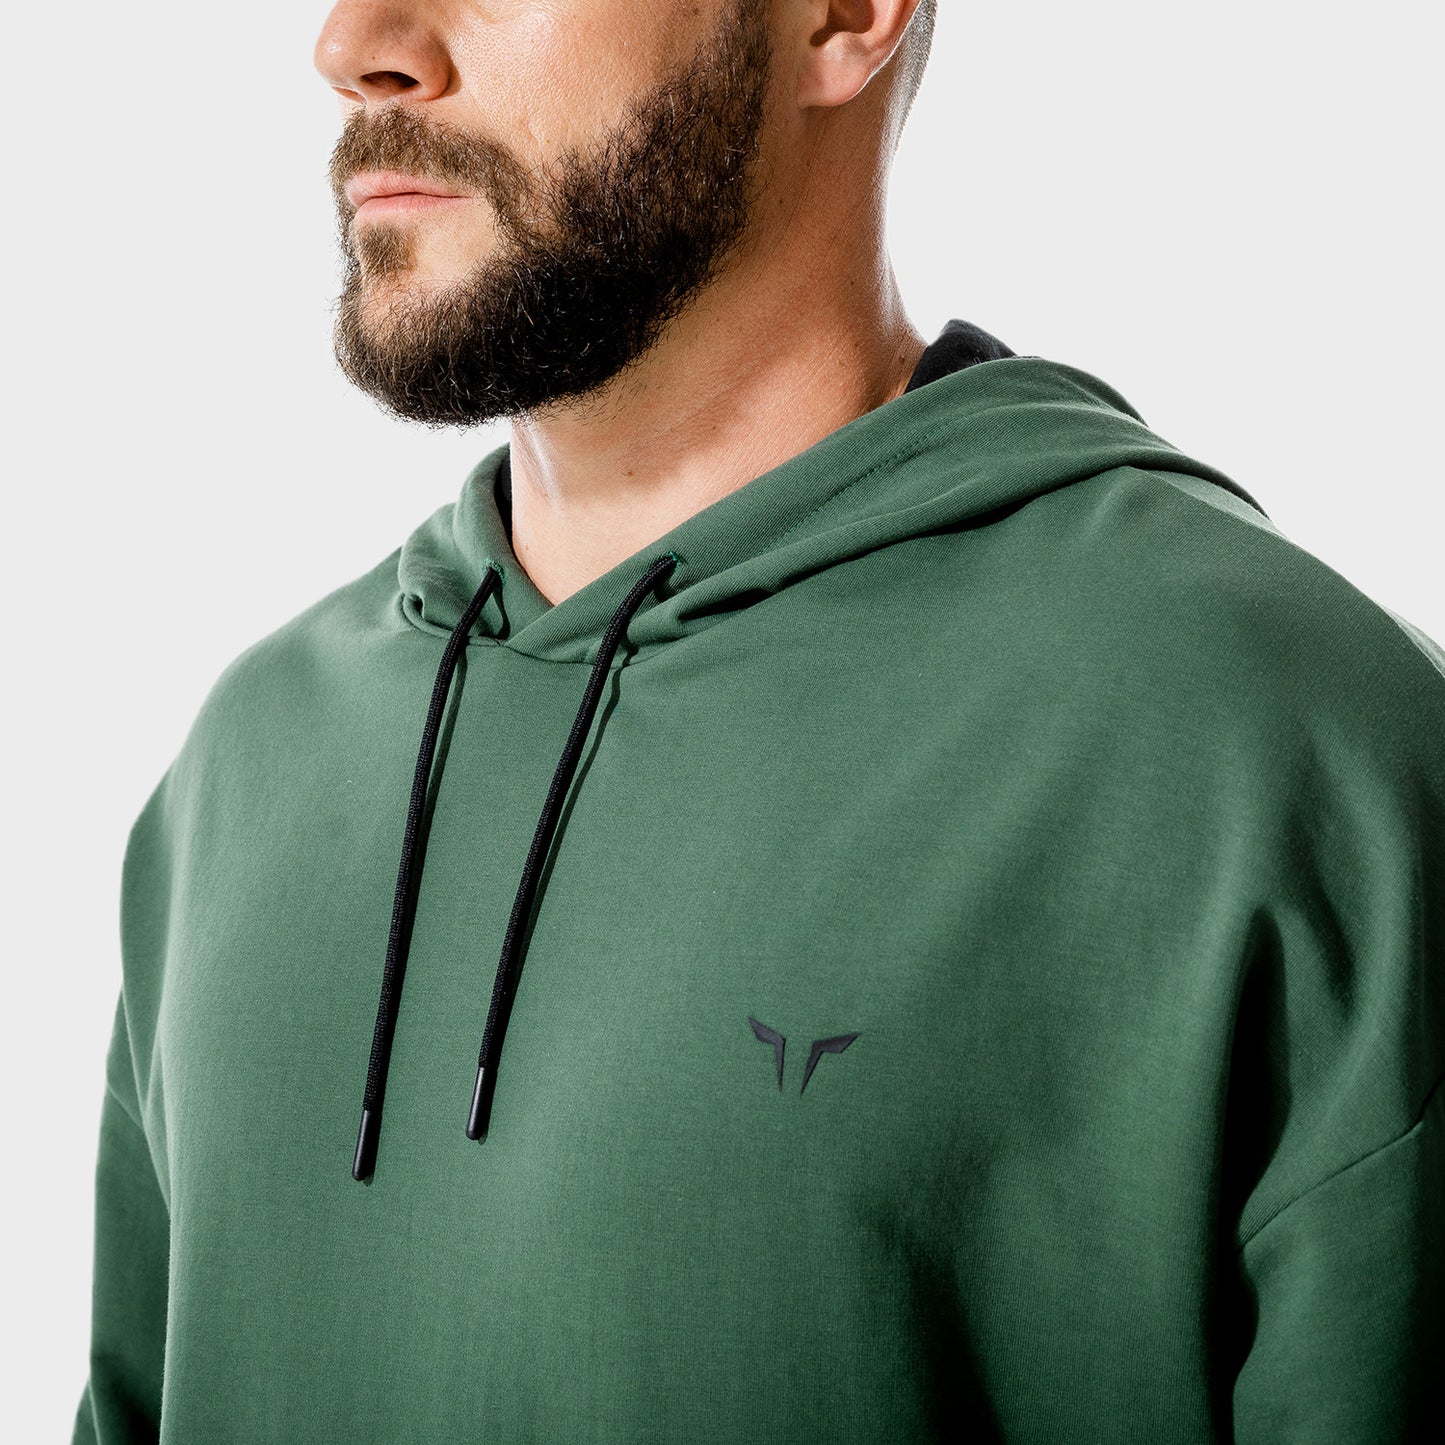 squatwolf-gym-wear-lab-360-hoodie-green-workout-hoodies-for-men